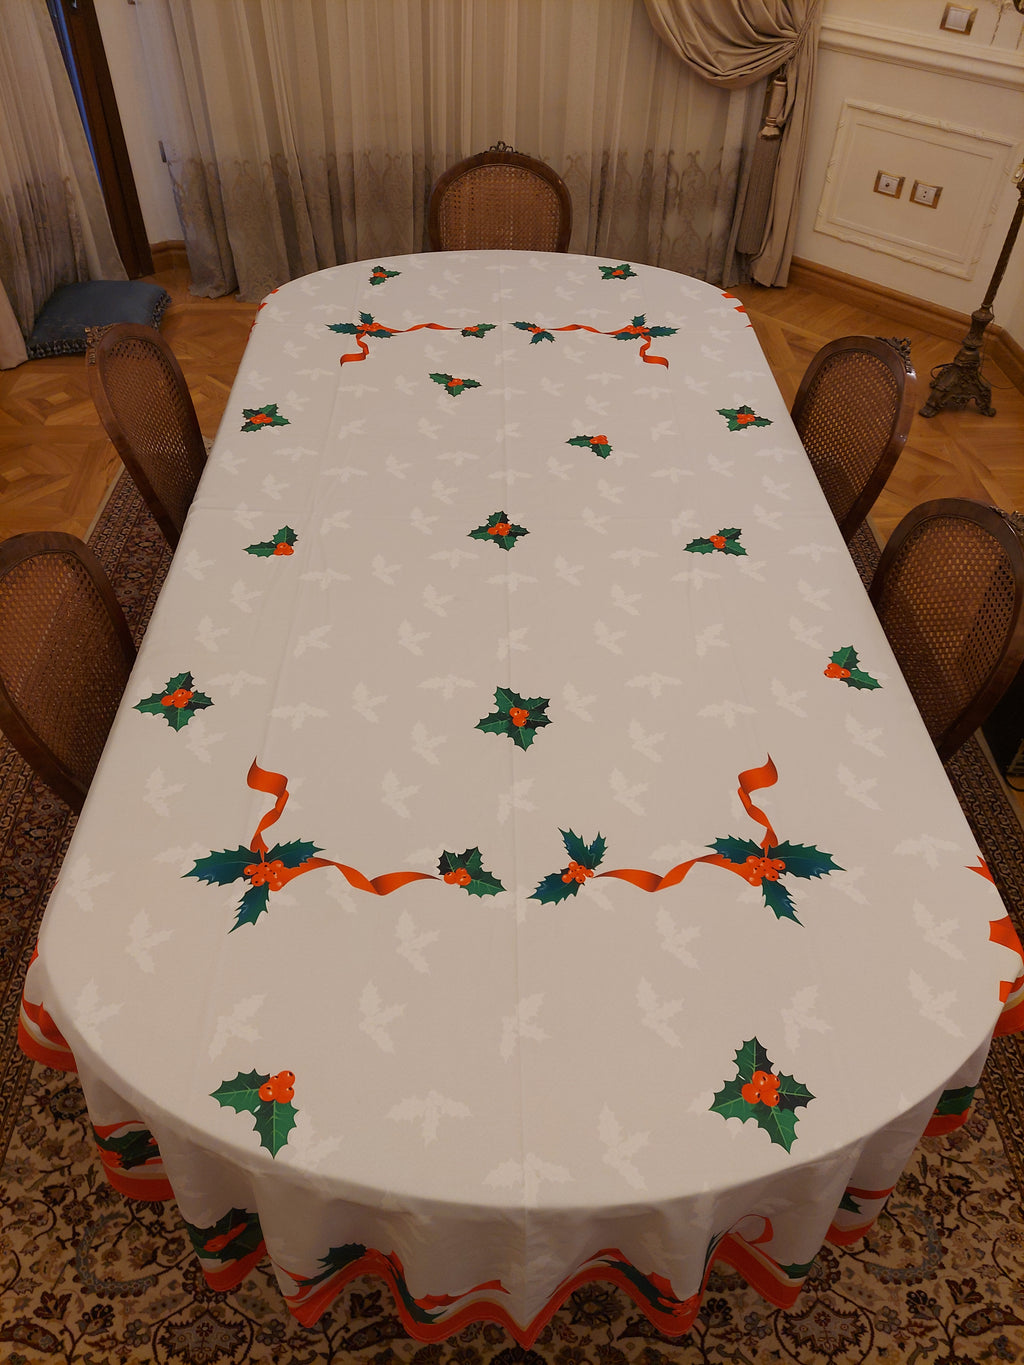 The Holly leaf elegance table cover